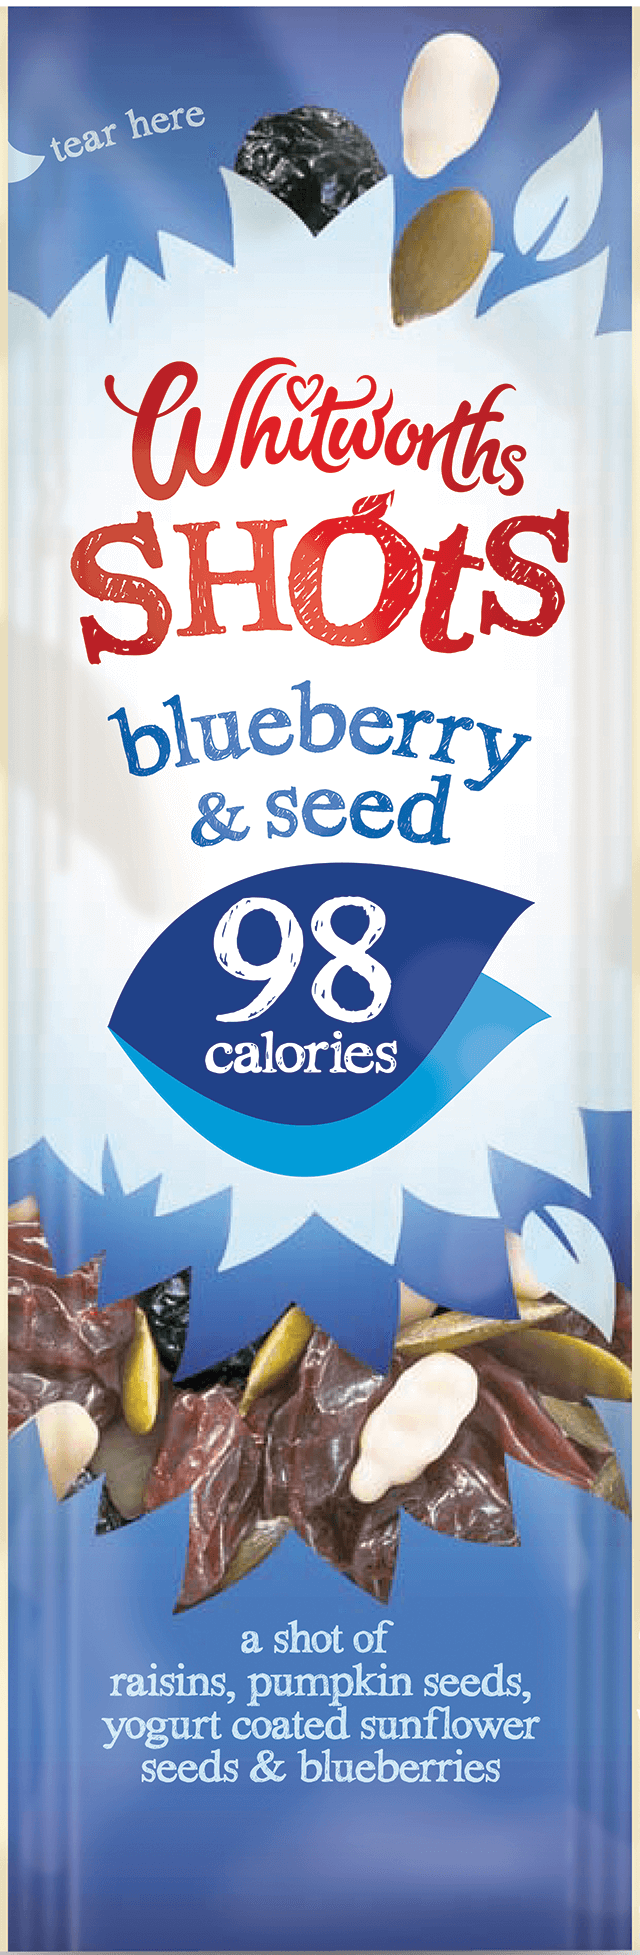 Whitworths Shots - Blueberry & Seed (98 calories)